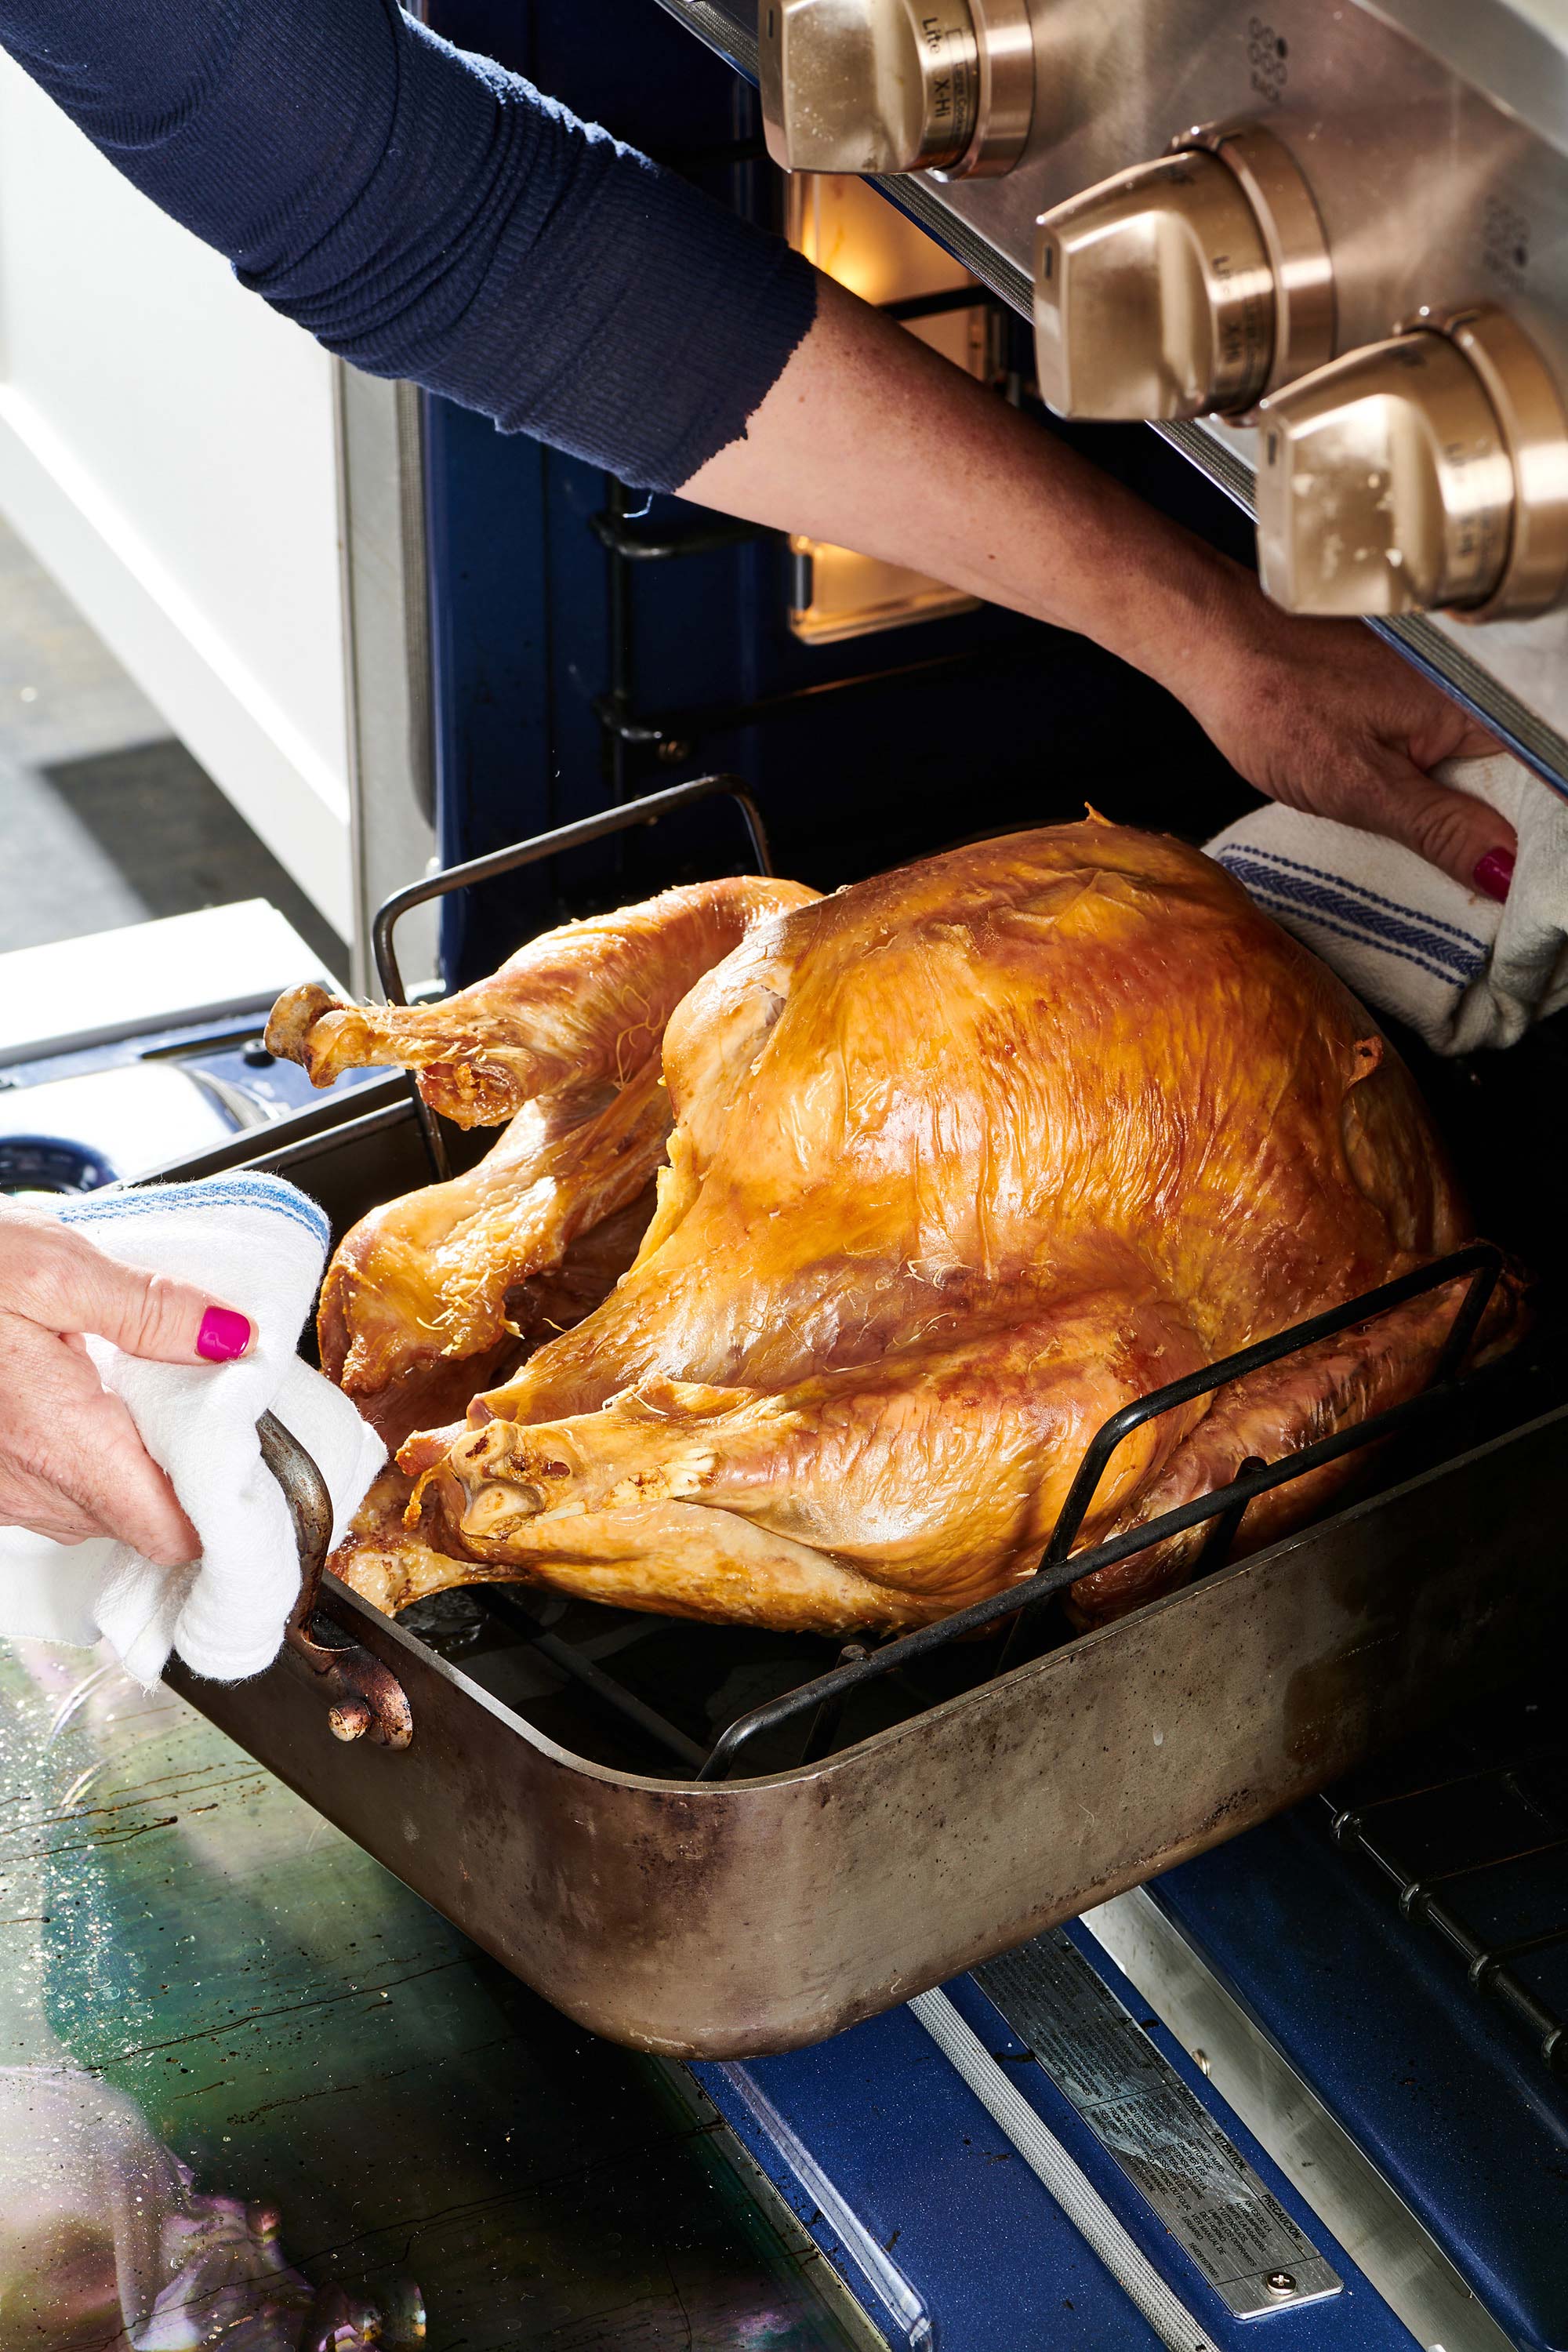 Woman removing a roasted turkey from the oven.